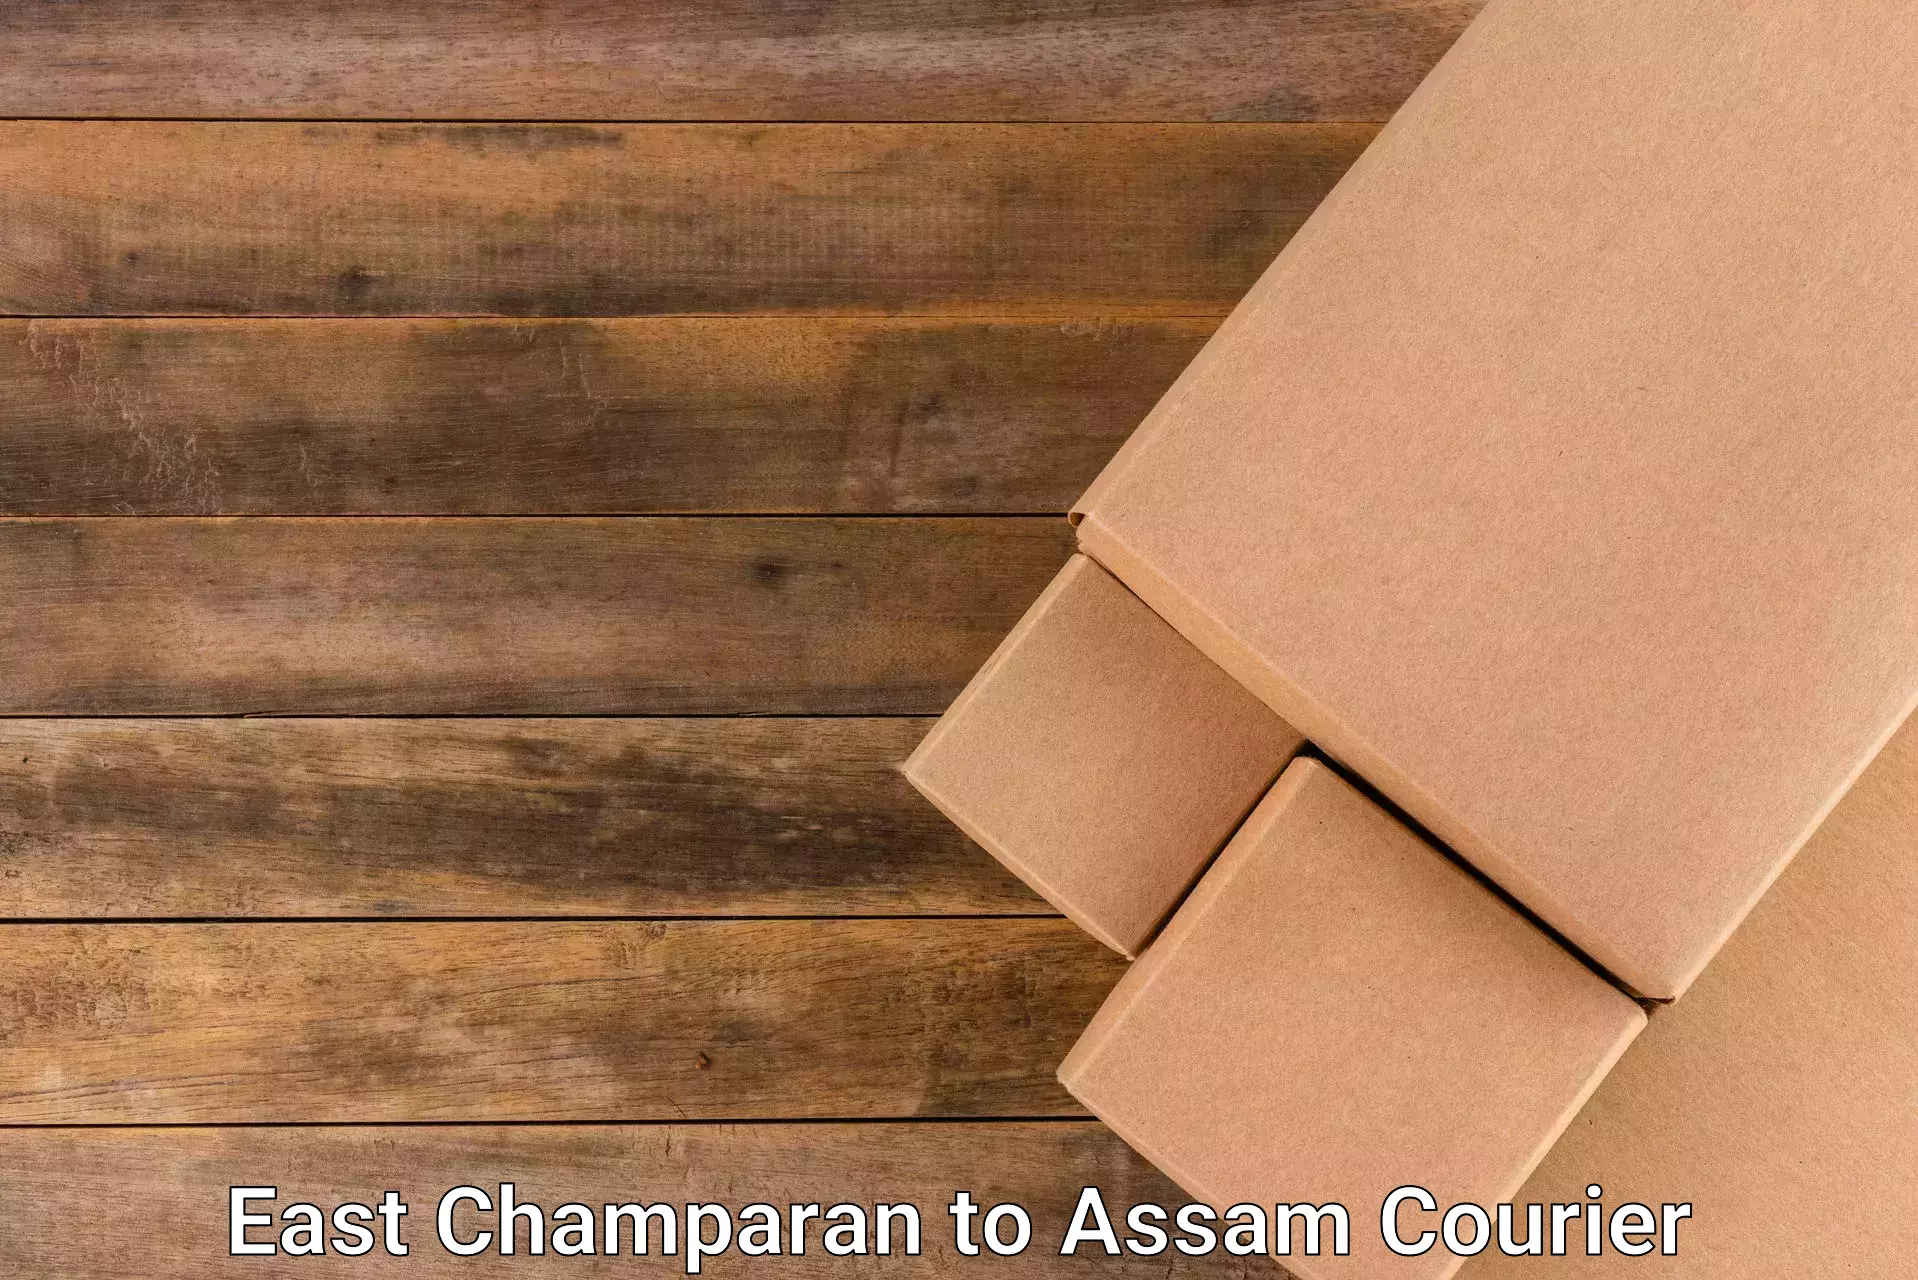 Speedy delivery service East Champaran to Assam